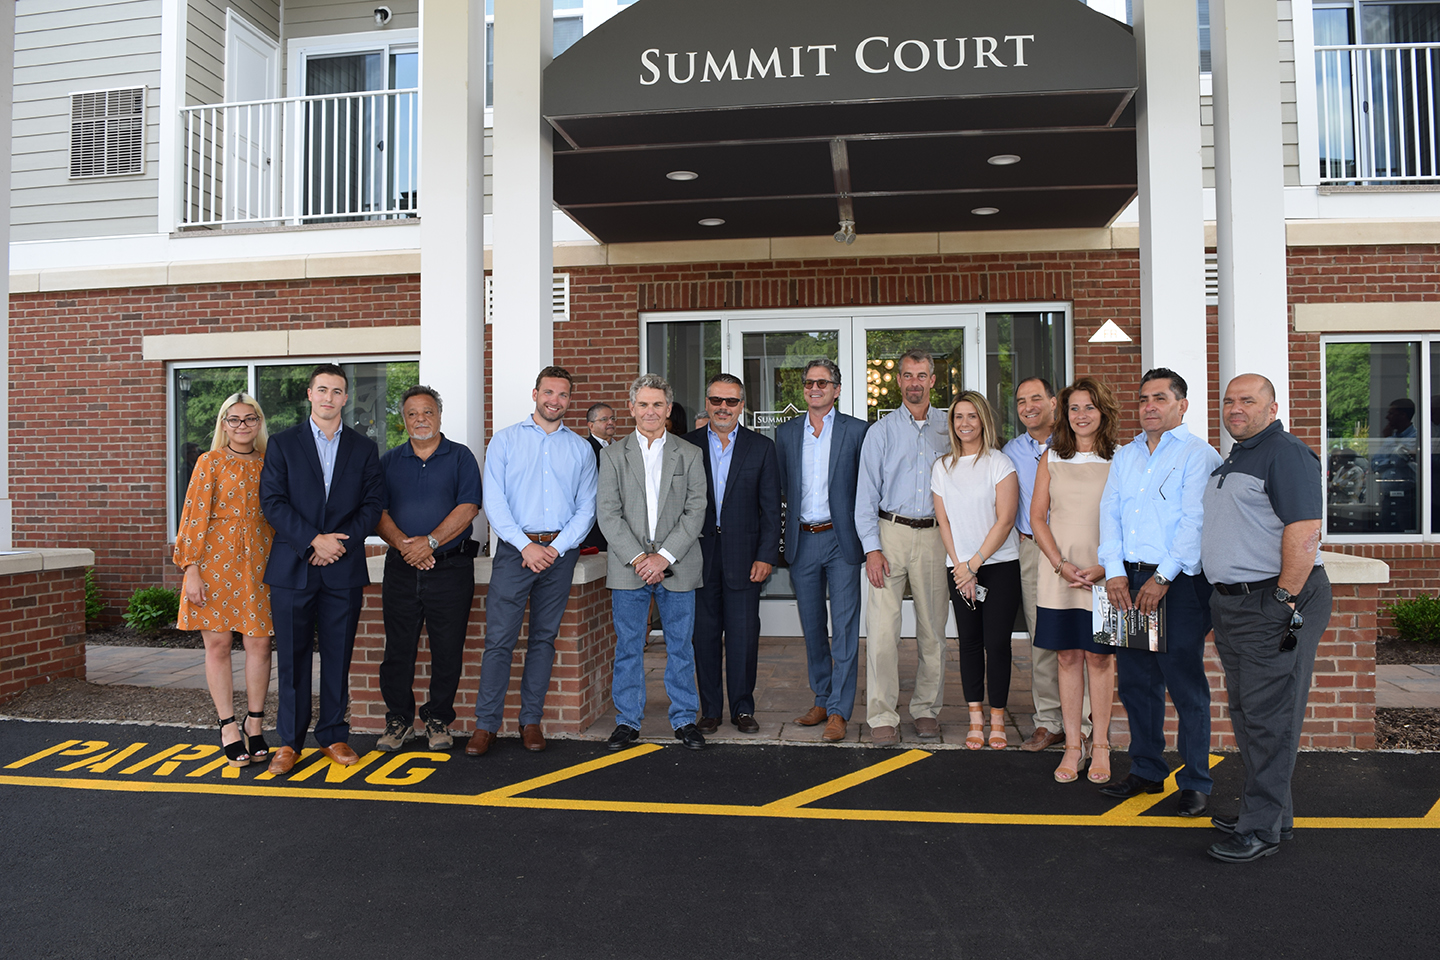 Diversified Realty Advisors recently hosted a ribbon cutting ceremony in celebration of the Grand Opening of Summit Court, a new rental community in Union, NJ.